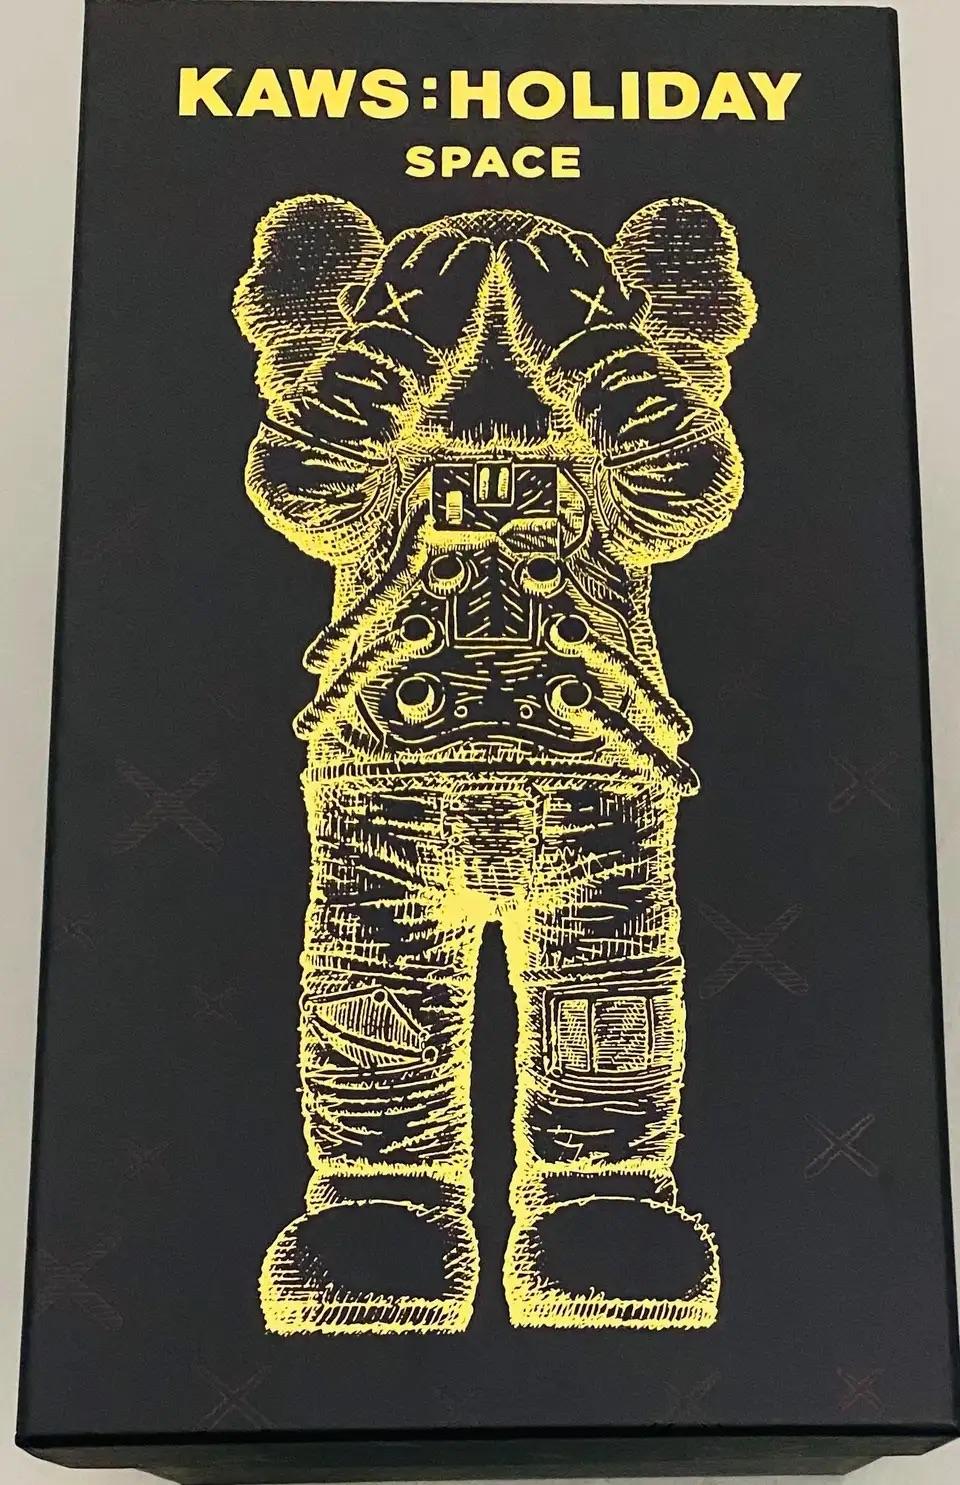 KAWS Holiday SPACE: complete set of 3 works (KAWS holiday space set)  6